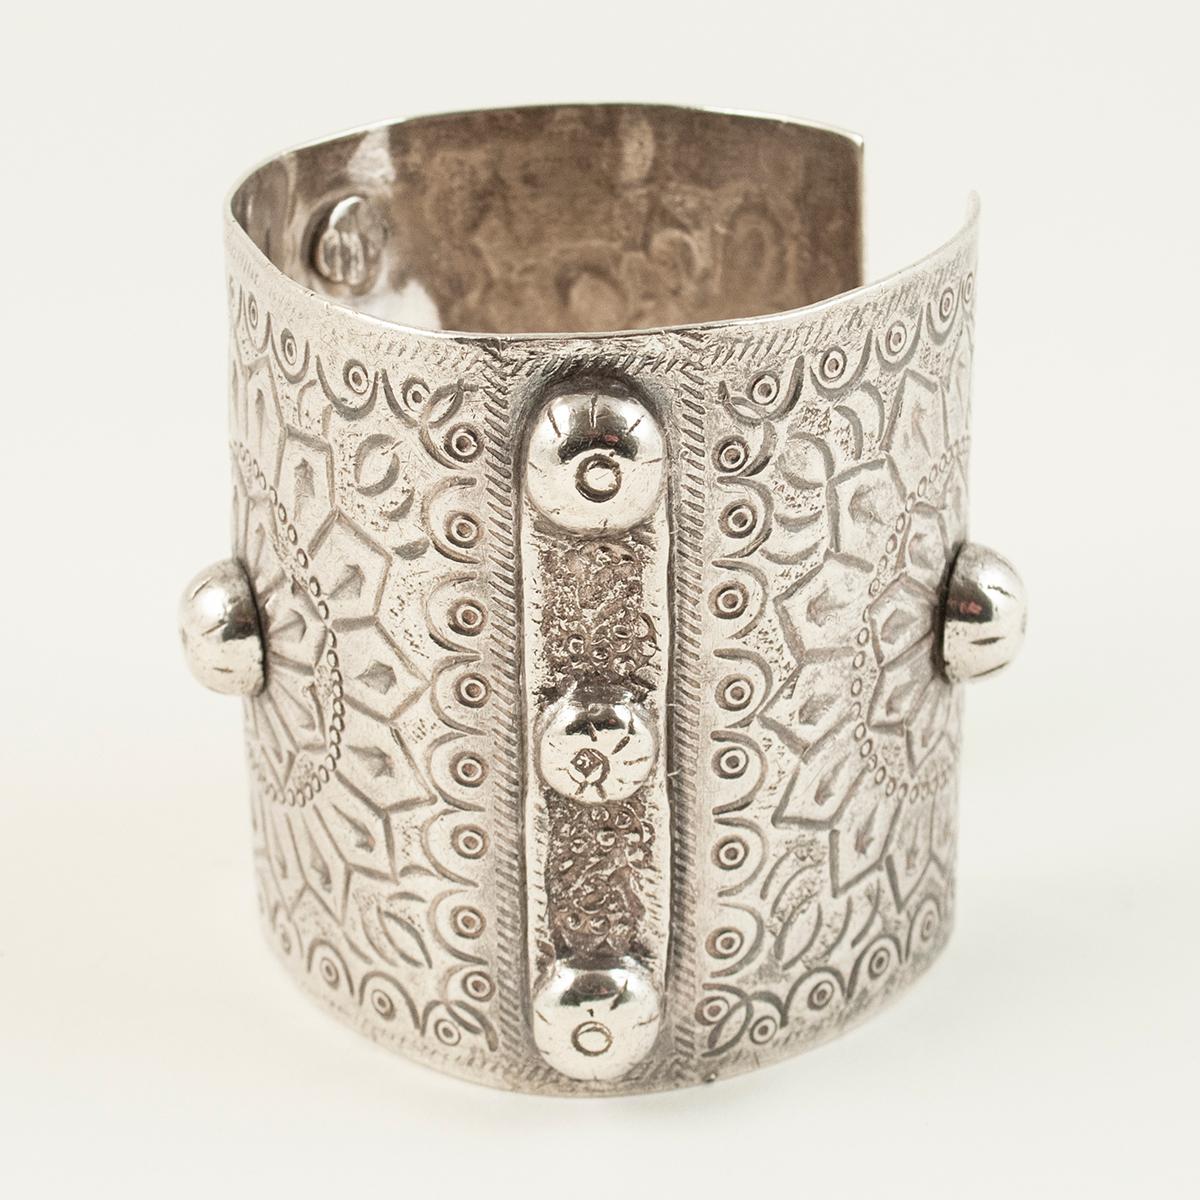 1960s silver tribal cuff, Siwa Oasis, Egypt

A traditional cuff from Siwa Oasis with a sun motif. The three part silver hallmark indicates, from left to right: a purity of 800, the lotus, which is used for all pieces made after 1946, and the Arabic